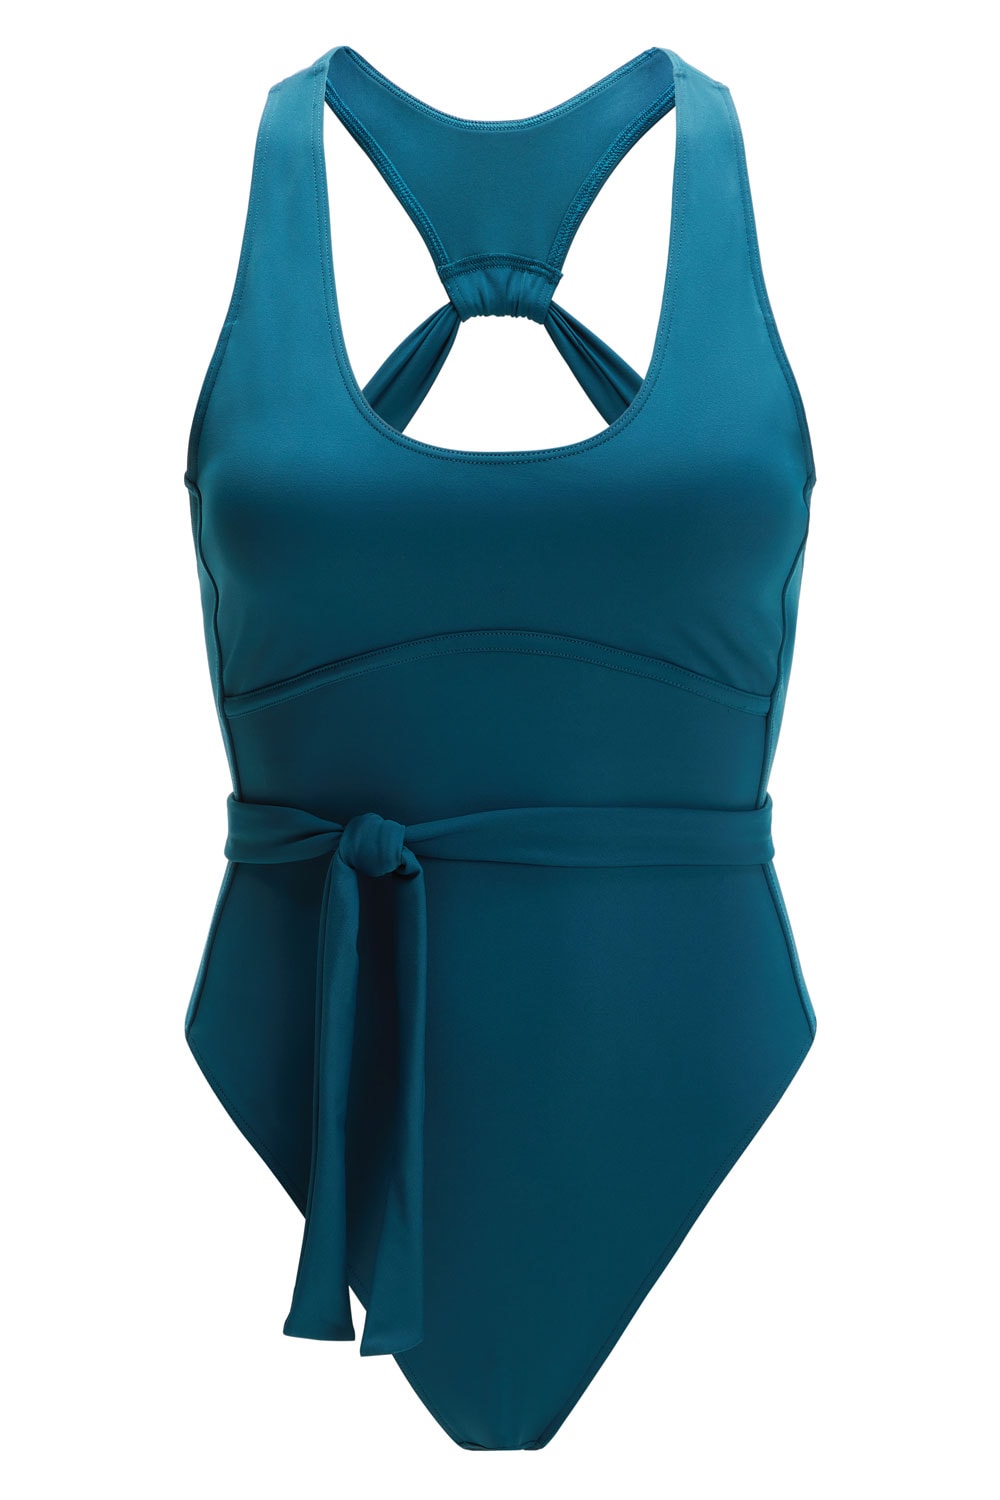 fabletics swim collection new release swimwear bikini bottoms tops one pieces cutouts plunging plunge deep cuts xxs 4xl size inclusive affordable accessible